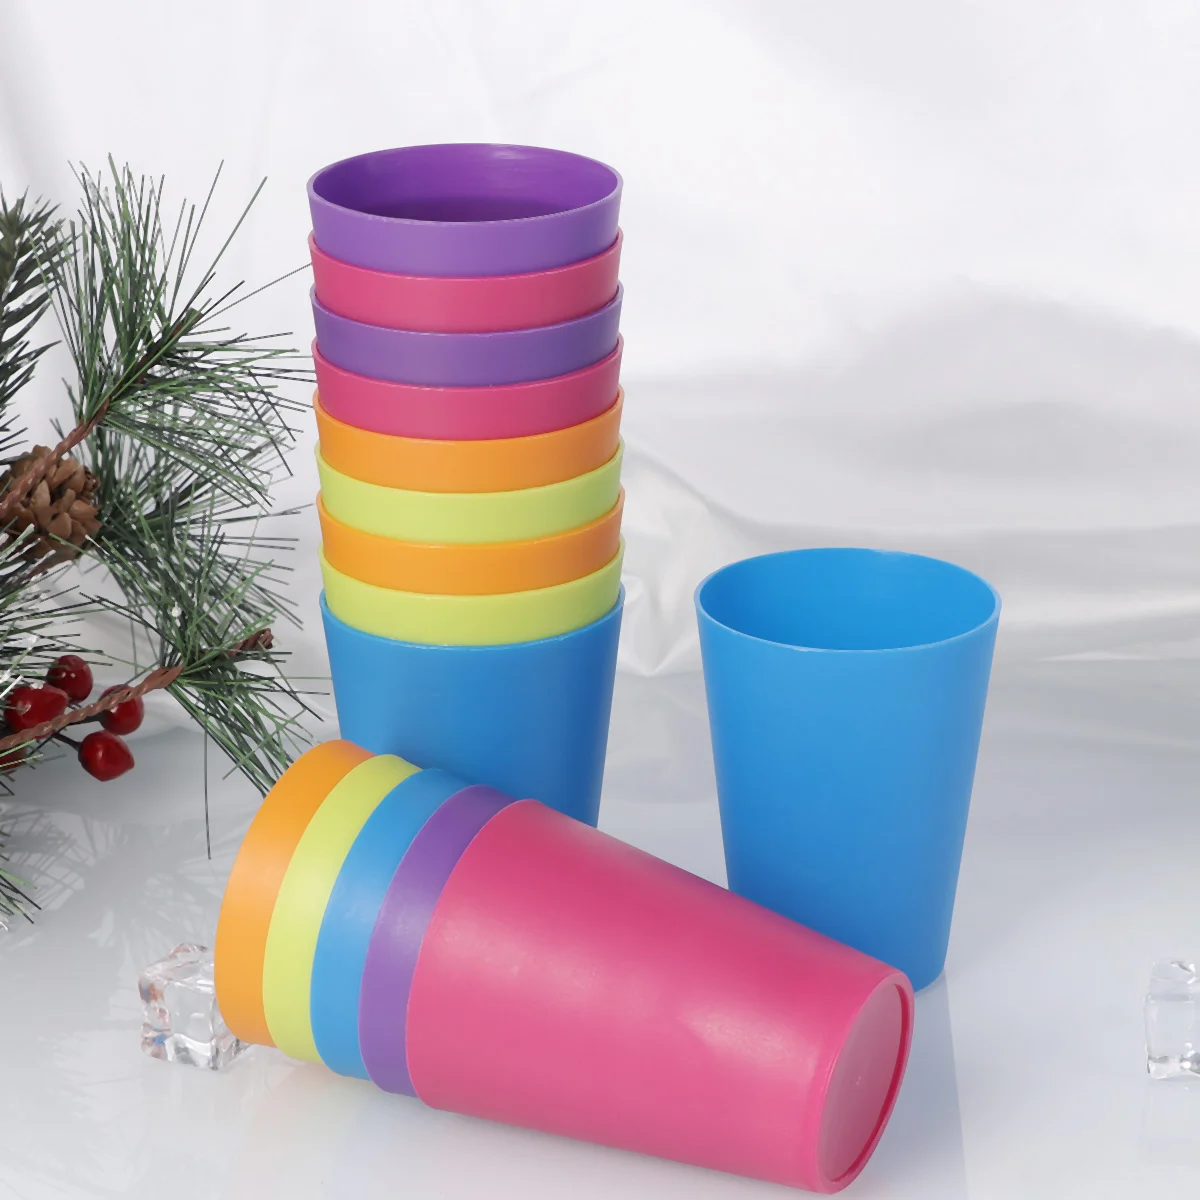 

15pcs Colorful Plastic Cups Home Beverage Drinking Cup Reusable Holiday Party Tableware and Party Supplies 101-200ml (Mixed